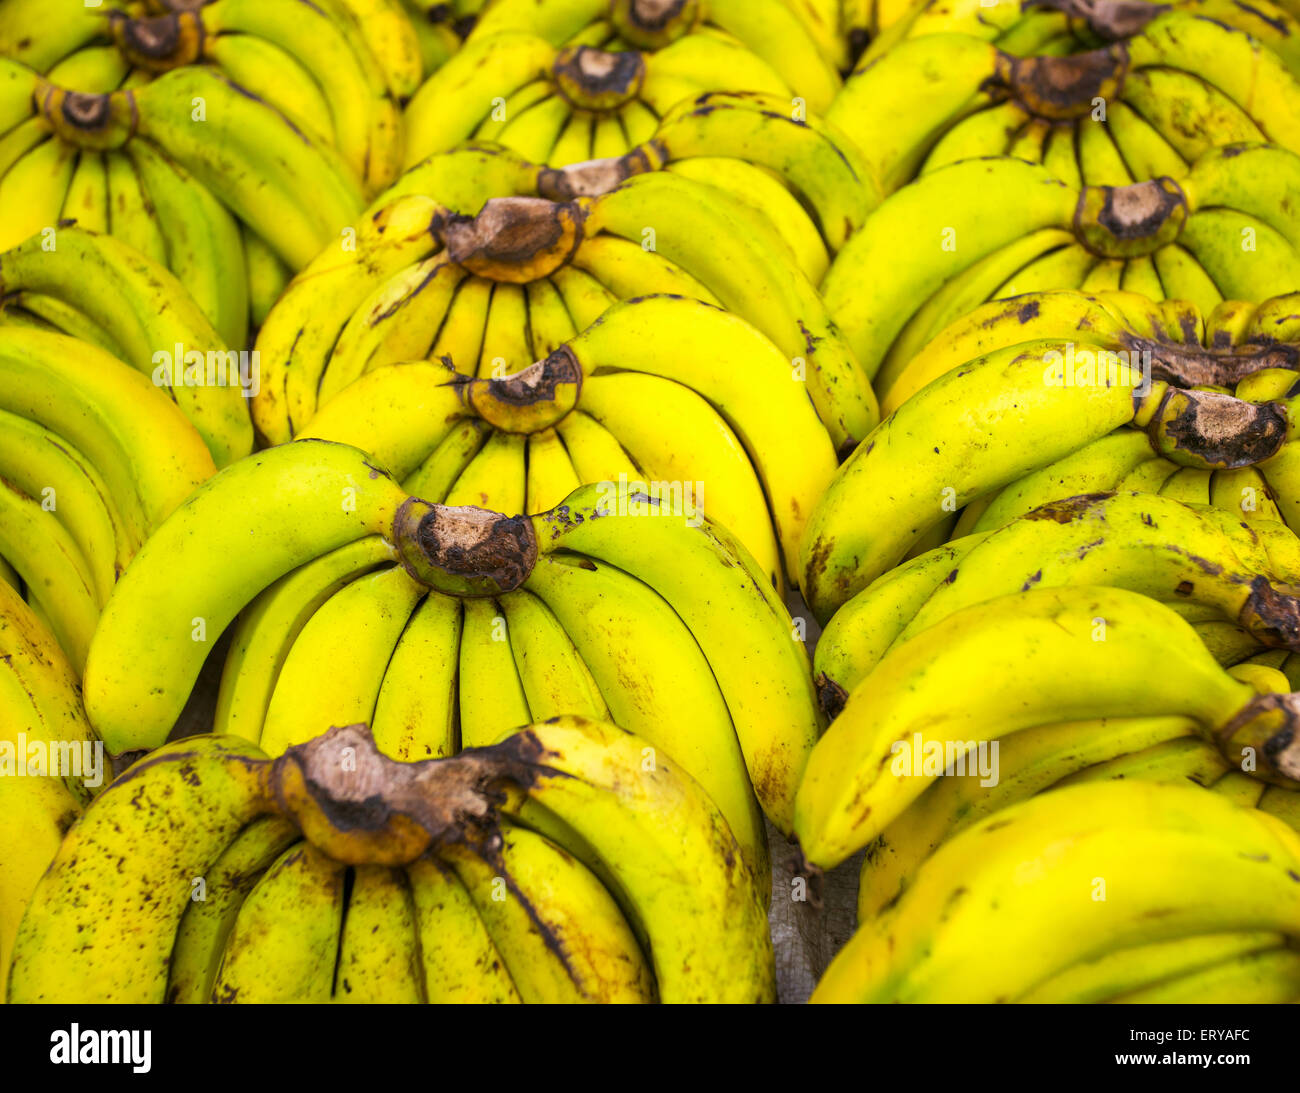 Bunches of ripe bananas on the market Stock Photo